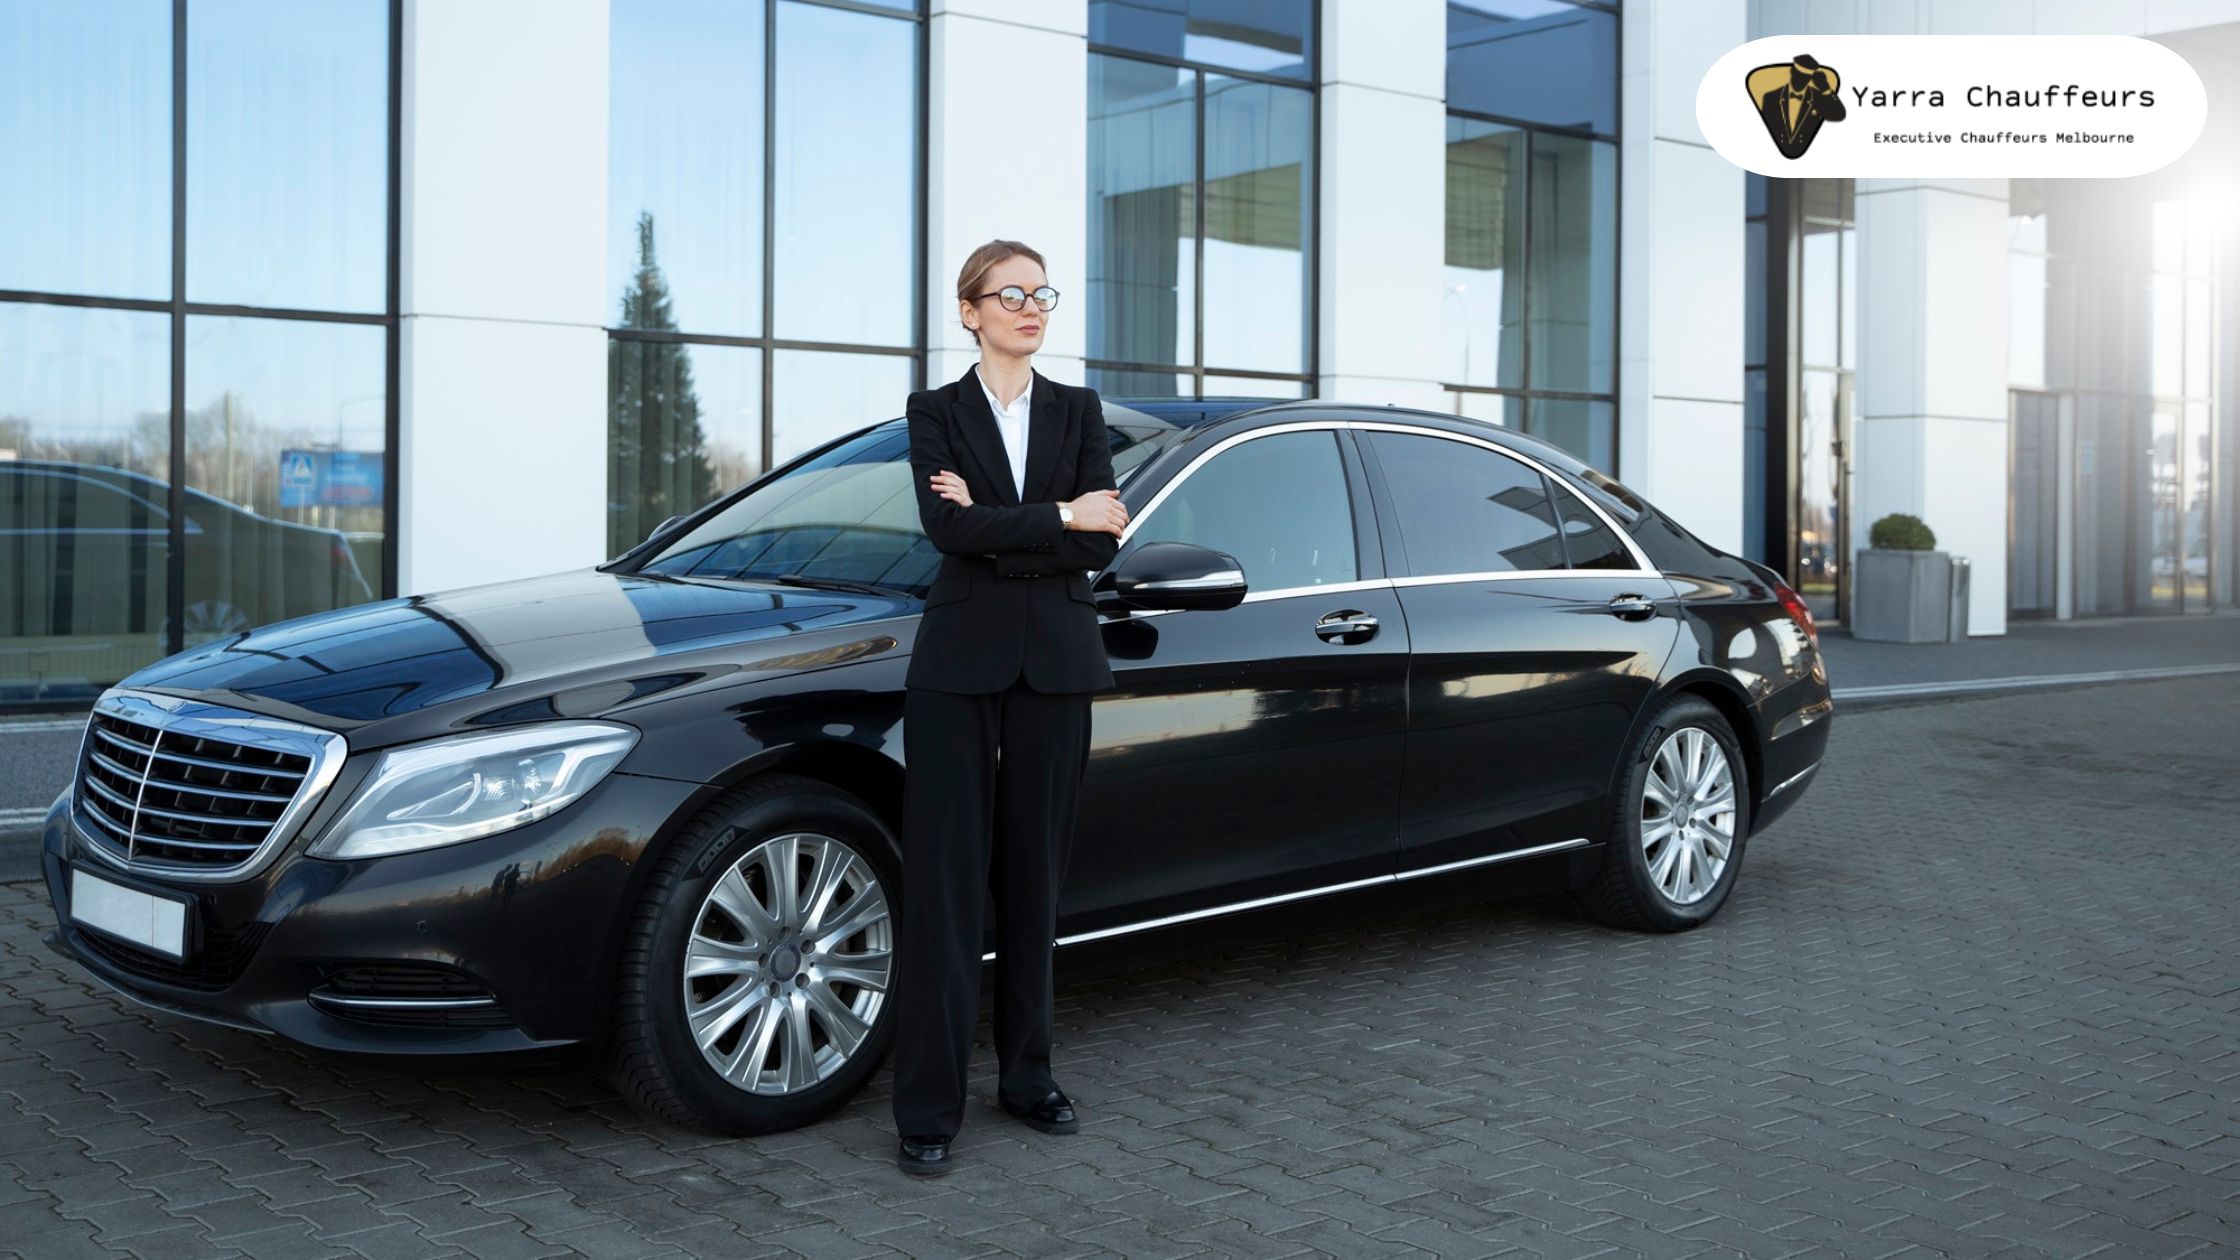 Arrive In Style, Depart With Elegance: Melbourne's Leading Chauffeur Experience - Yarra Chauffeurs